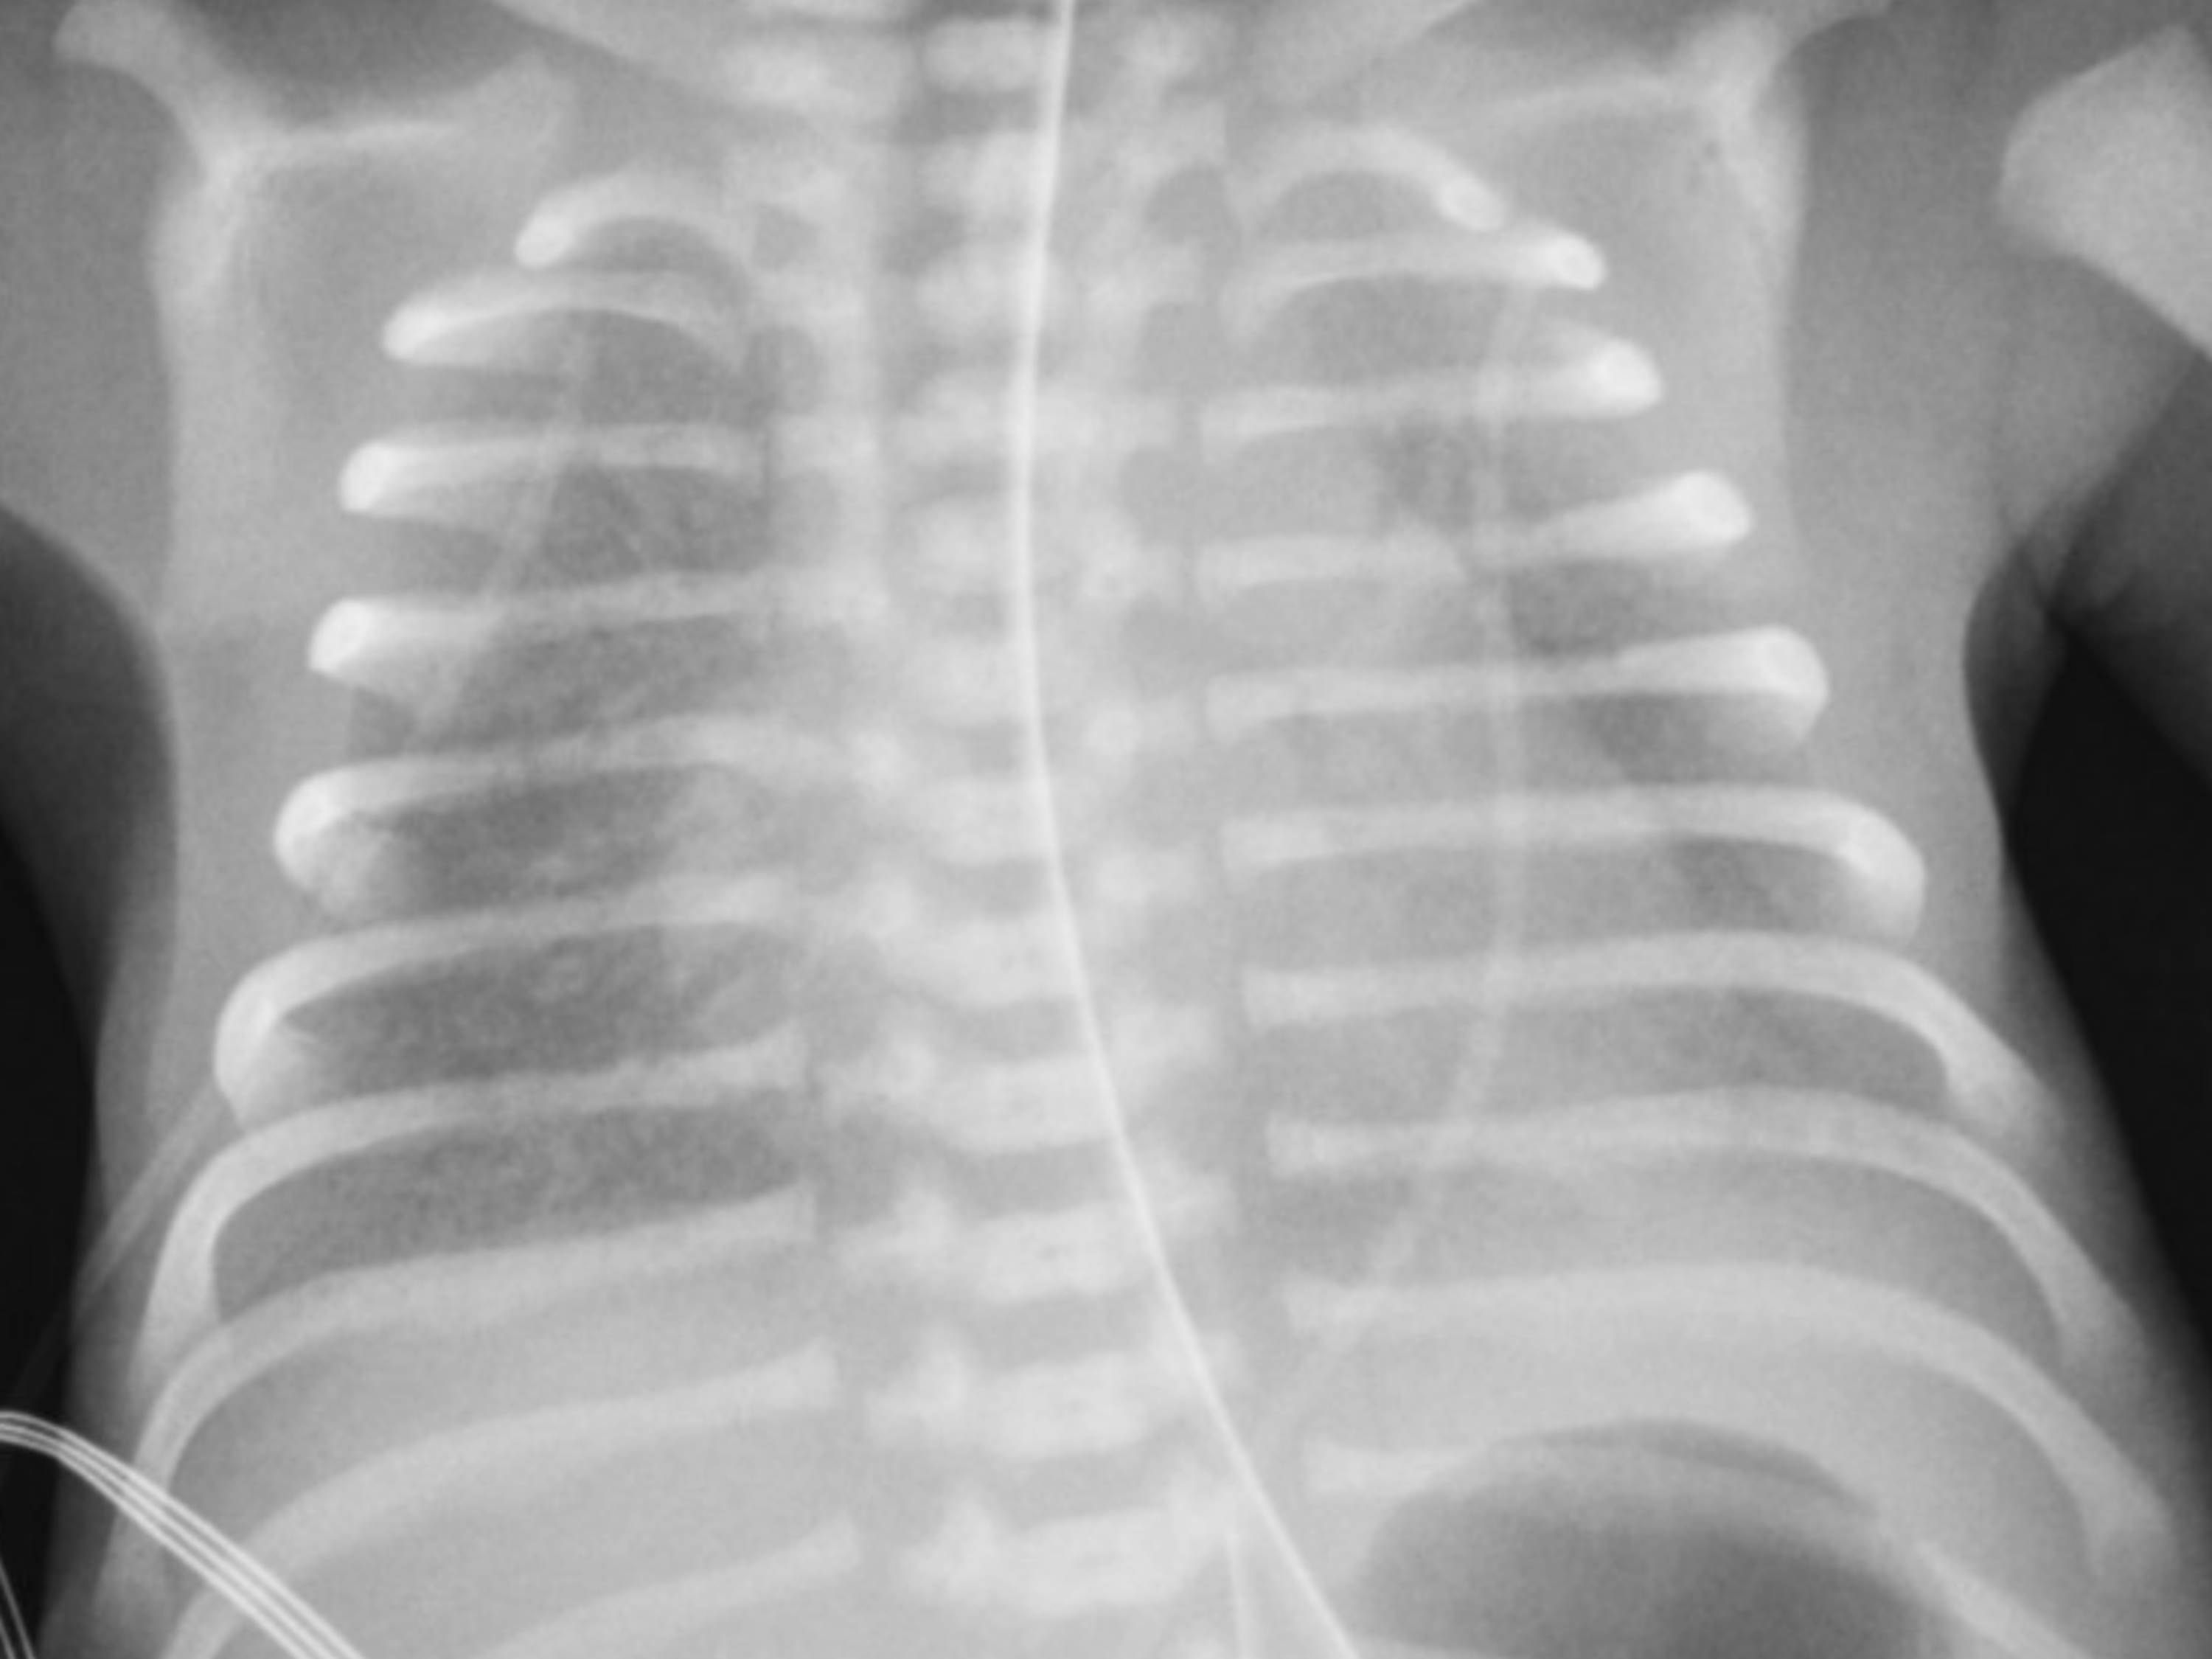 This is a chest radiograph of a preterm neonate with respiratory distress syndrome showing diffuse ground glass haziness bilaterally with air bronchograms. 